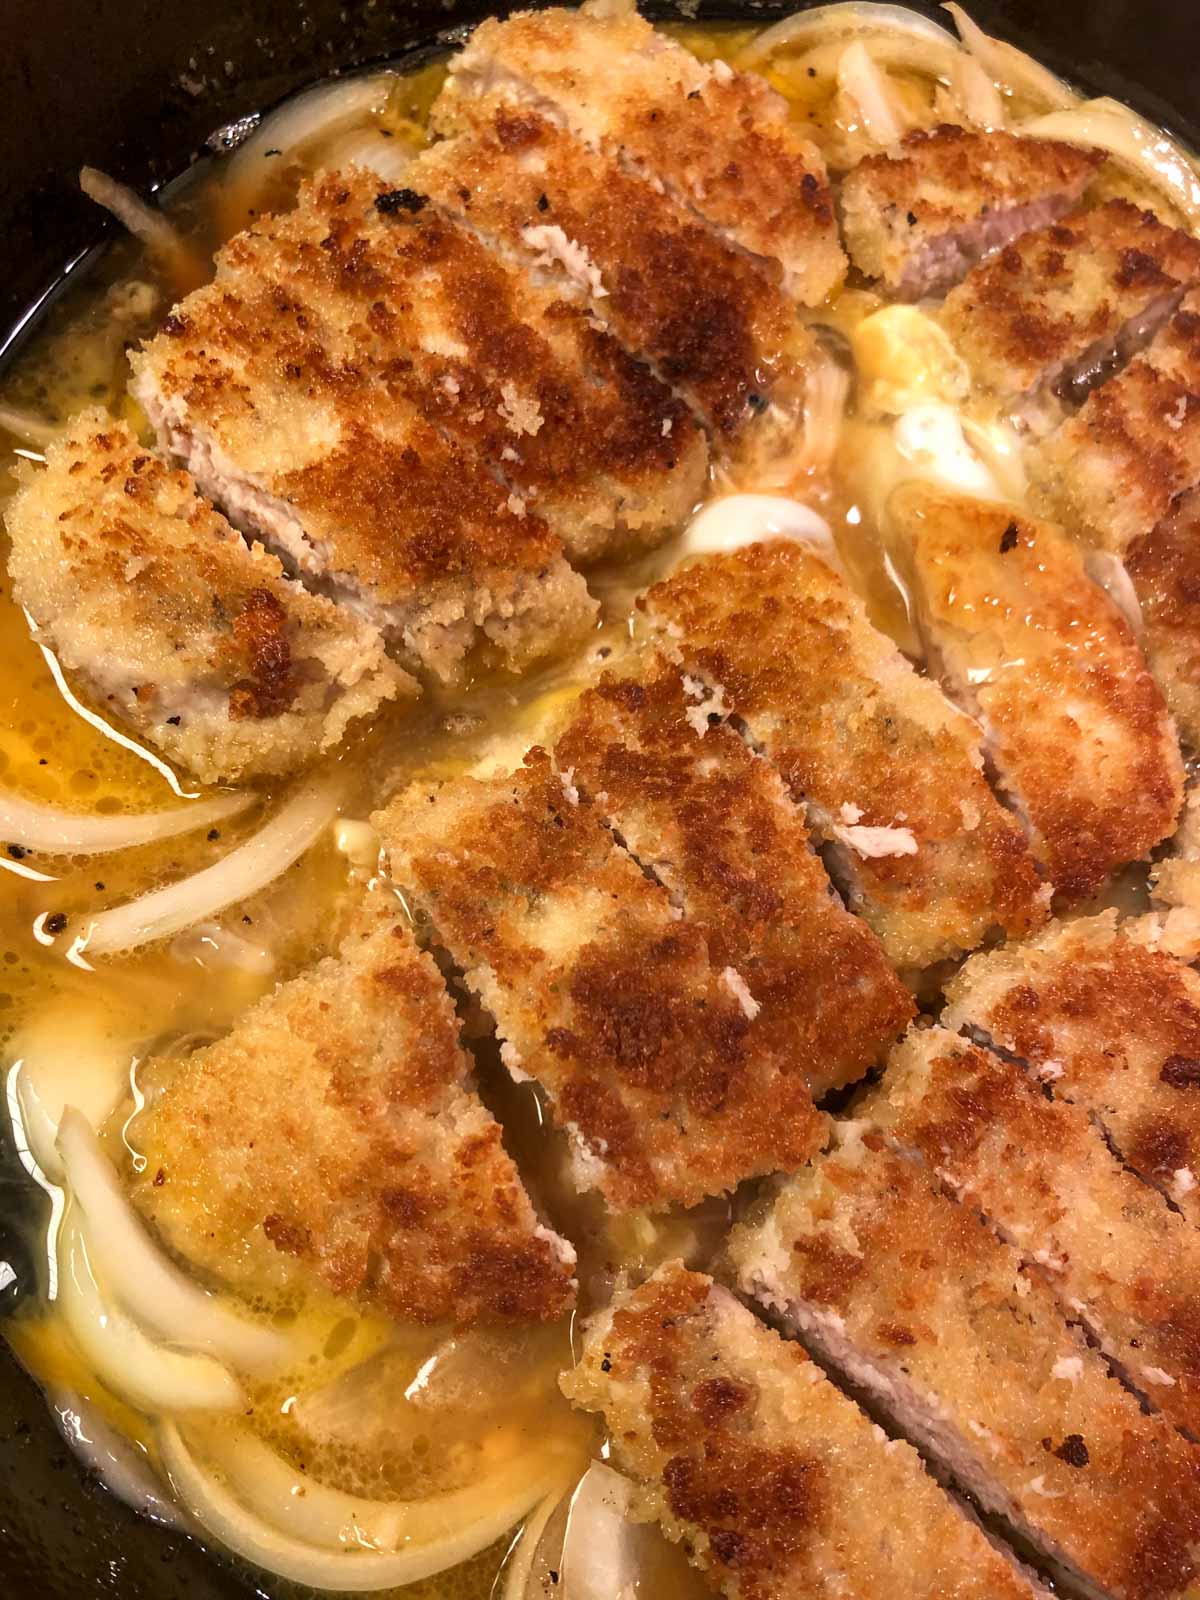 Breaded pieces of pork chops sitting atop onions and surrounded by an egg and broth mixture in a cast iron pan.